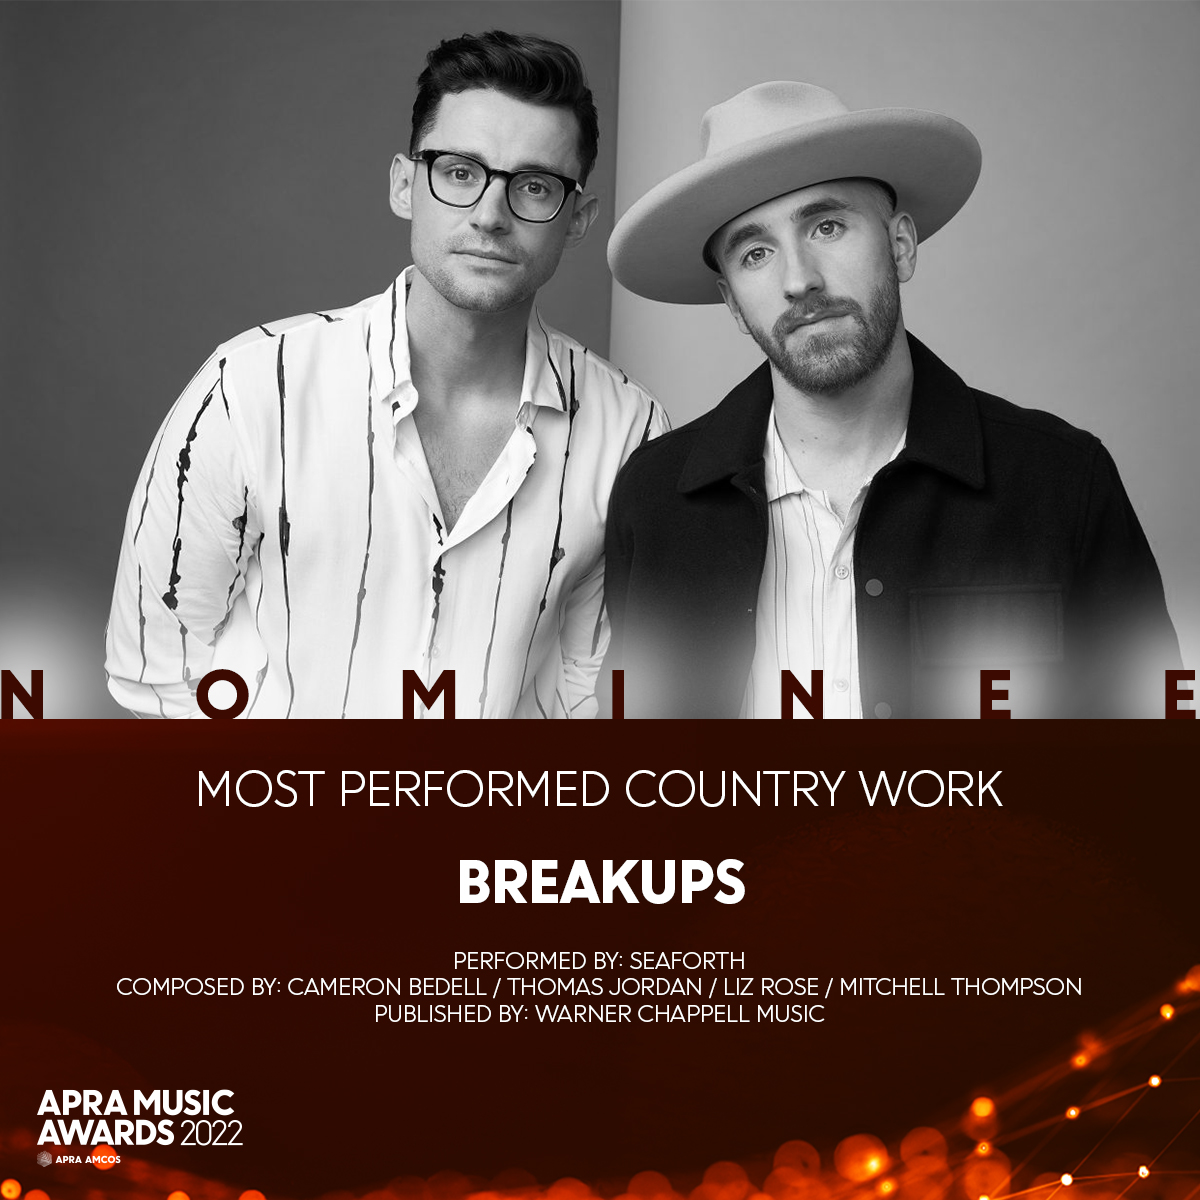 We've got some stellar nominees for our Most Performed Country Work: Title: Breakups Artist: @weareseaforth Writers: @cameronbedell / Thomas Jordan / Liz Rose / Mitchell Thompson Publisher: @WarnerChappell